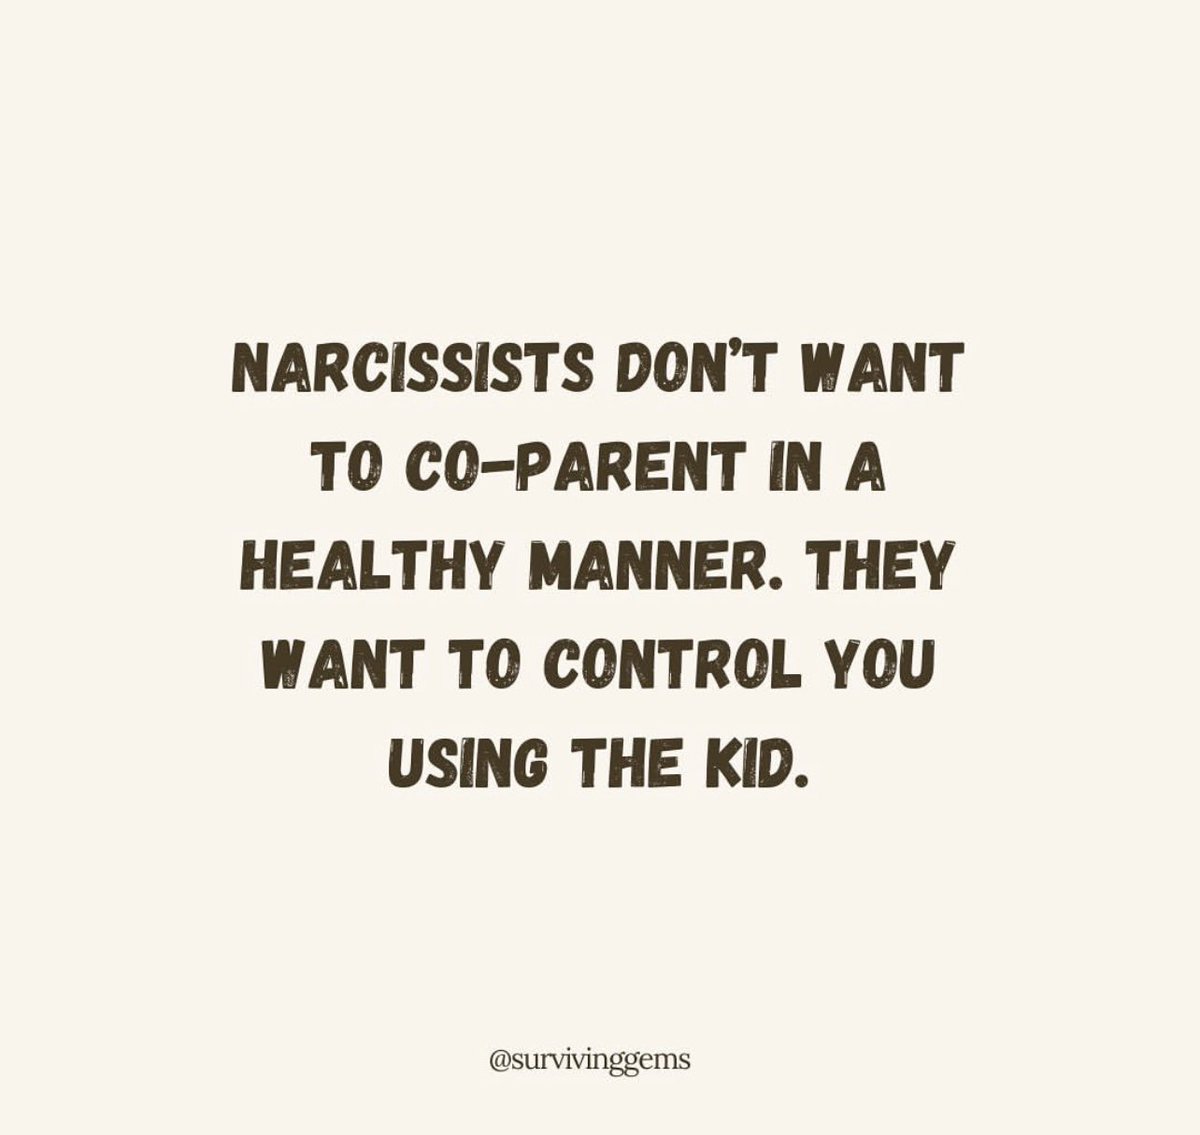 A #Narcissist is not afraid to manipulate or abuse their own child. #ParentalAlienation is #childabuse. Most alienators have a #PersonalityDisorder, but not all. Please don’t blame hardworking people who just want to #coparent in peace.